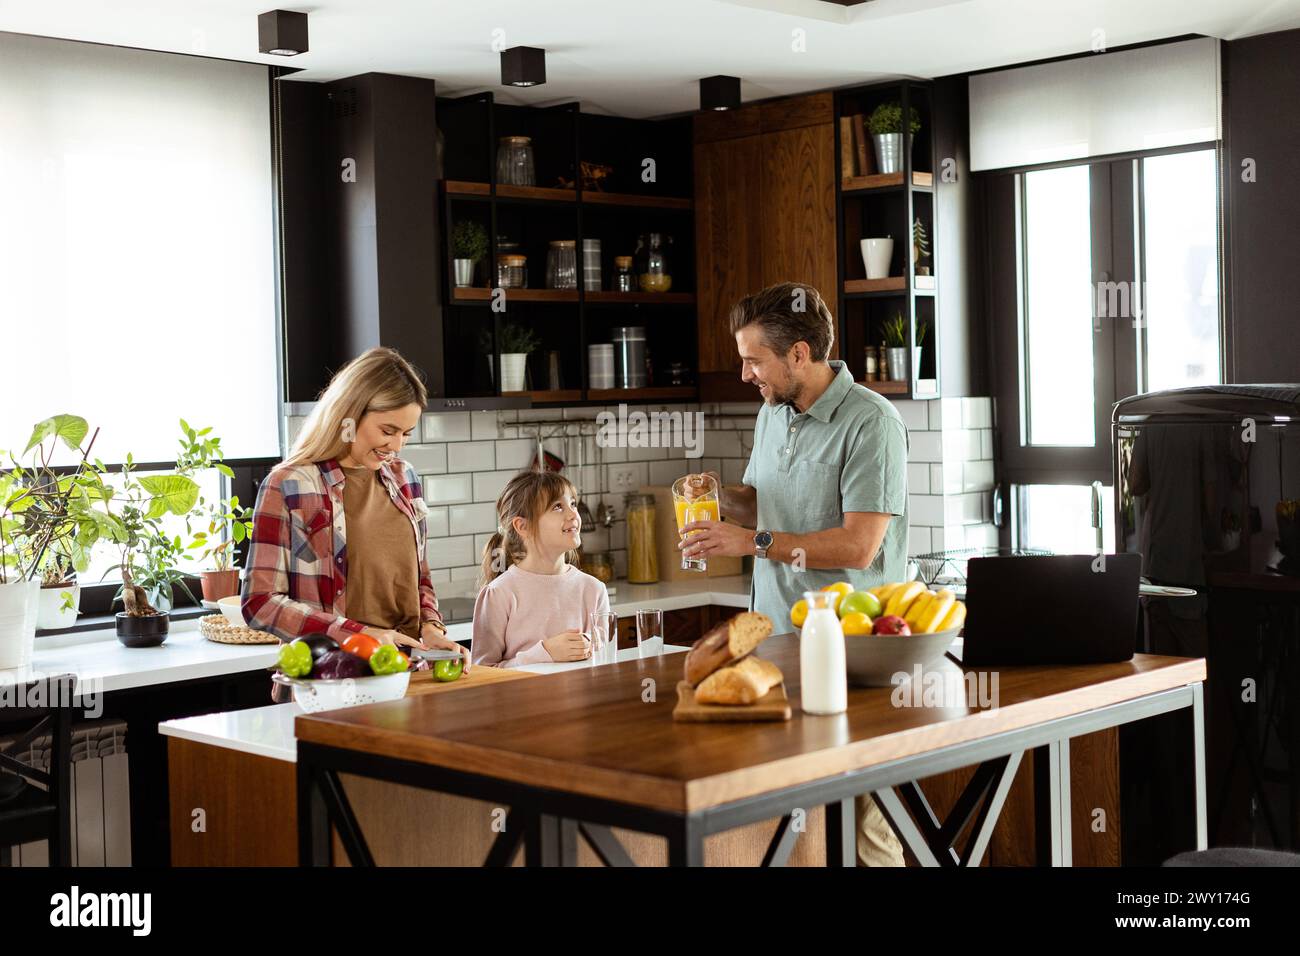 Young family chatting and preparing food around a bustling kitchen counter filled with fresh ingredients and cooking utensils Stock Photo